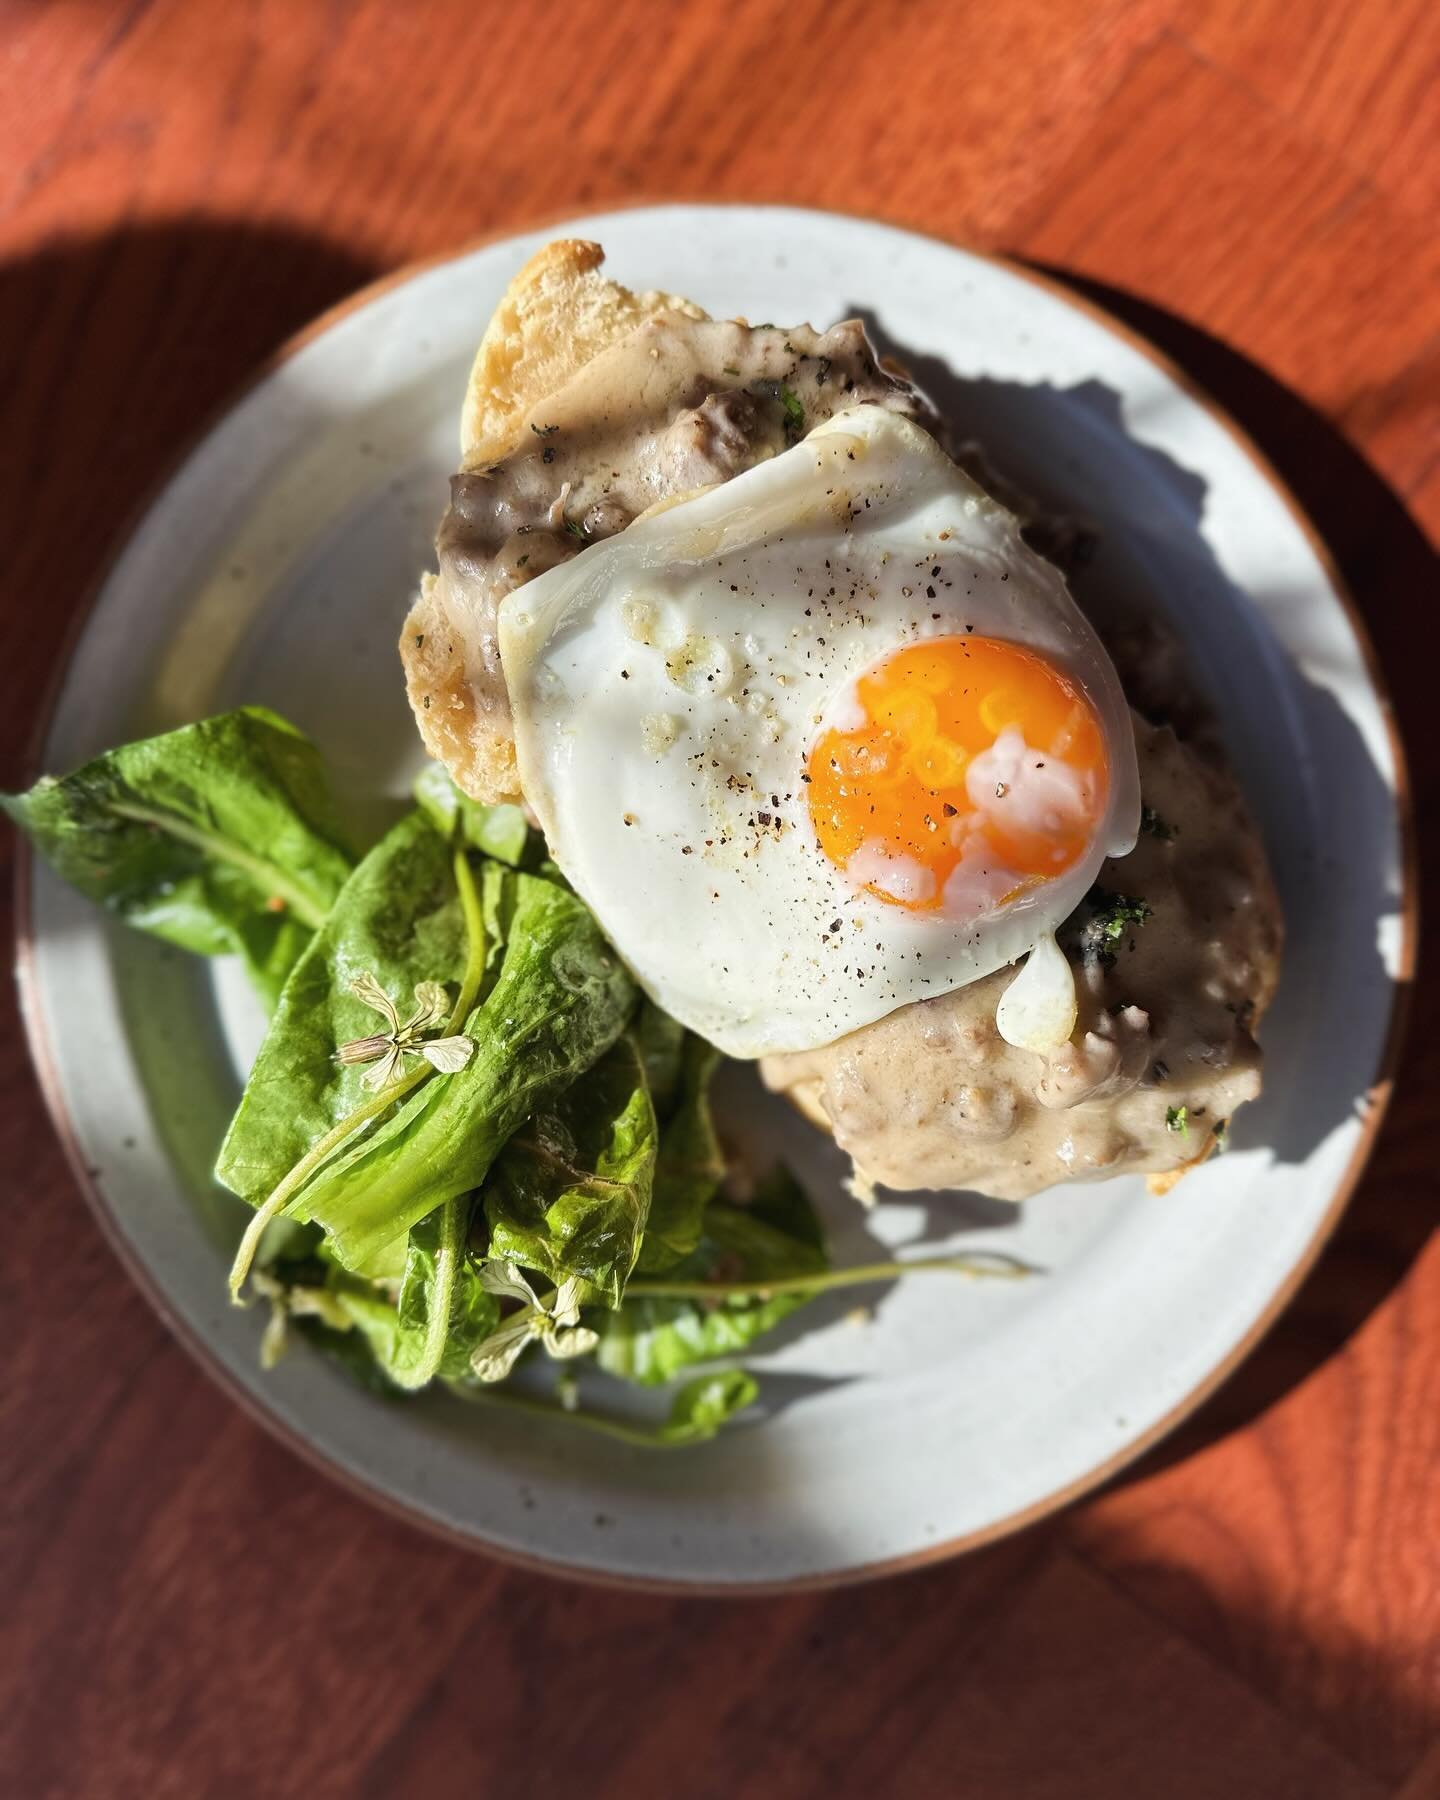 Couple of brunch beauties on the menu this weekend from Chef Billy and the crew.
1️⃣@freedomrunfarm Lamb sausage biscuit and gravy with a sunny farm egg and a little bitter chicory salad.
2️⃣@richlifefarm mushies with cheesey polenta, roasted waterme